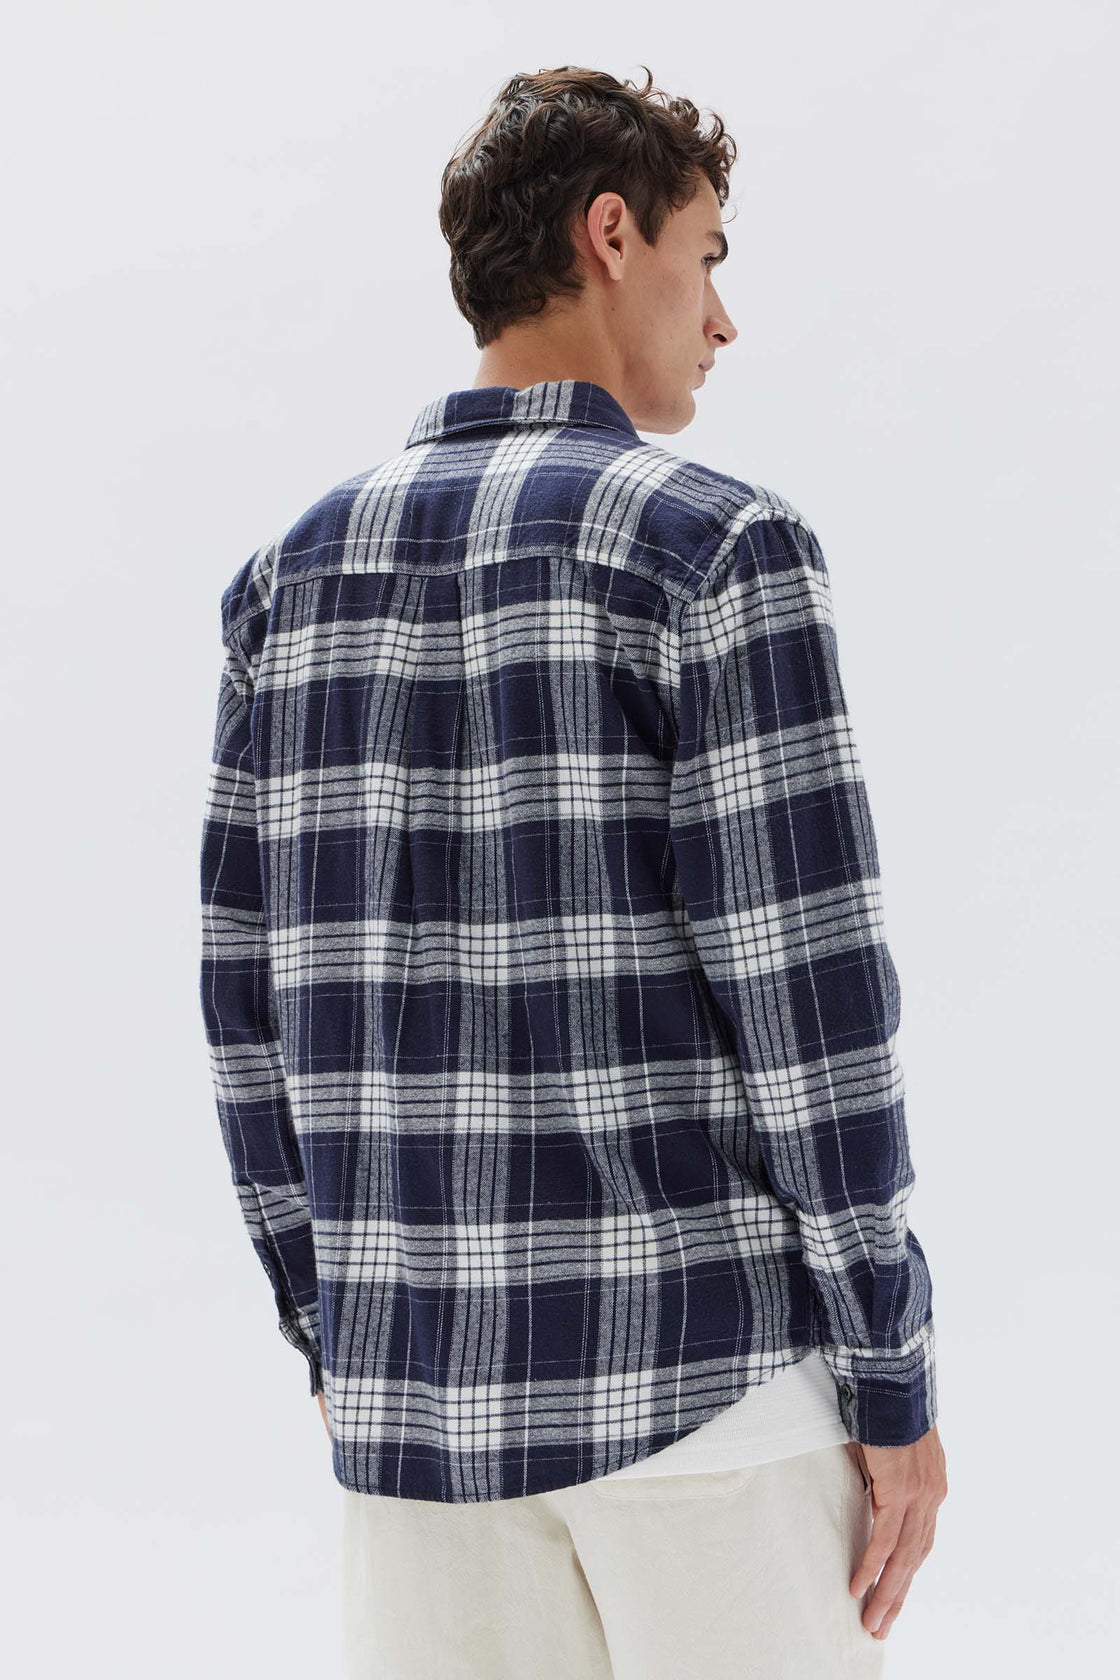 Vince Check Long Sleeve Shirt - True Navy /Antique White